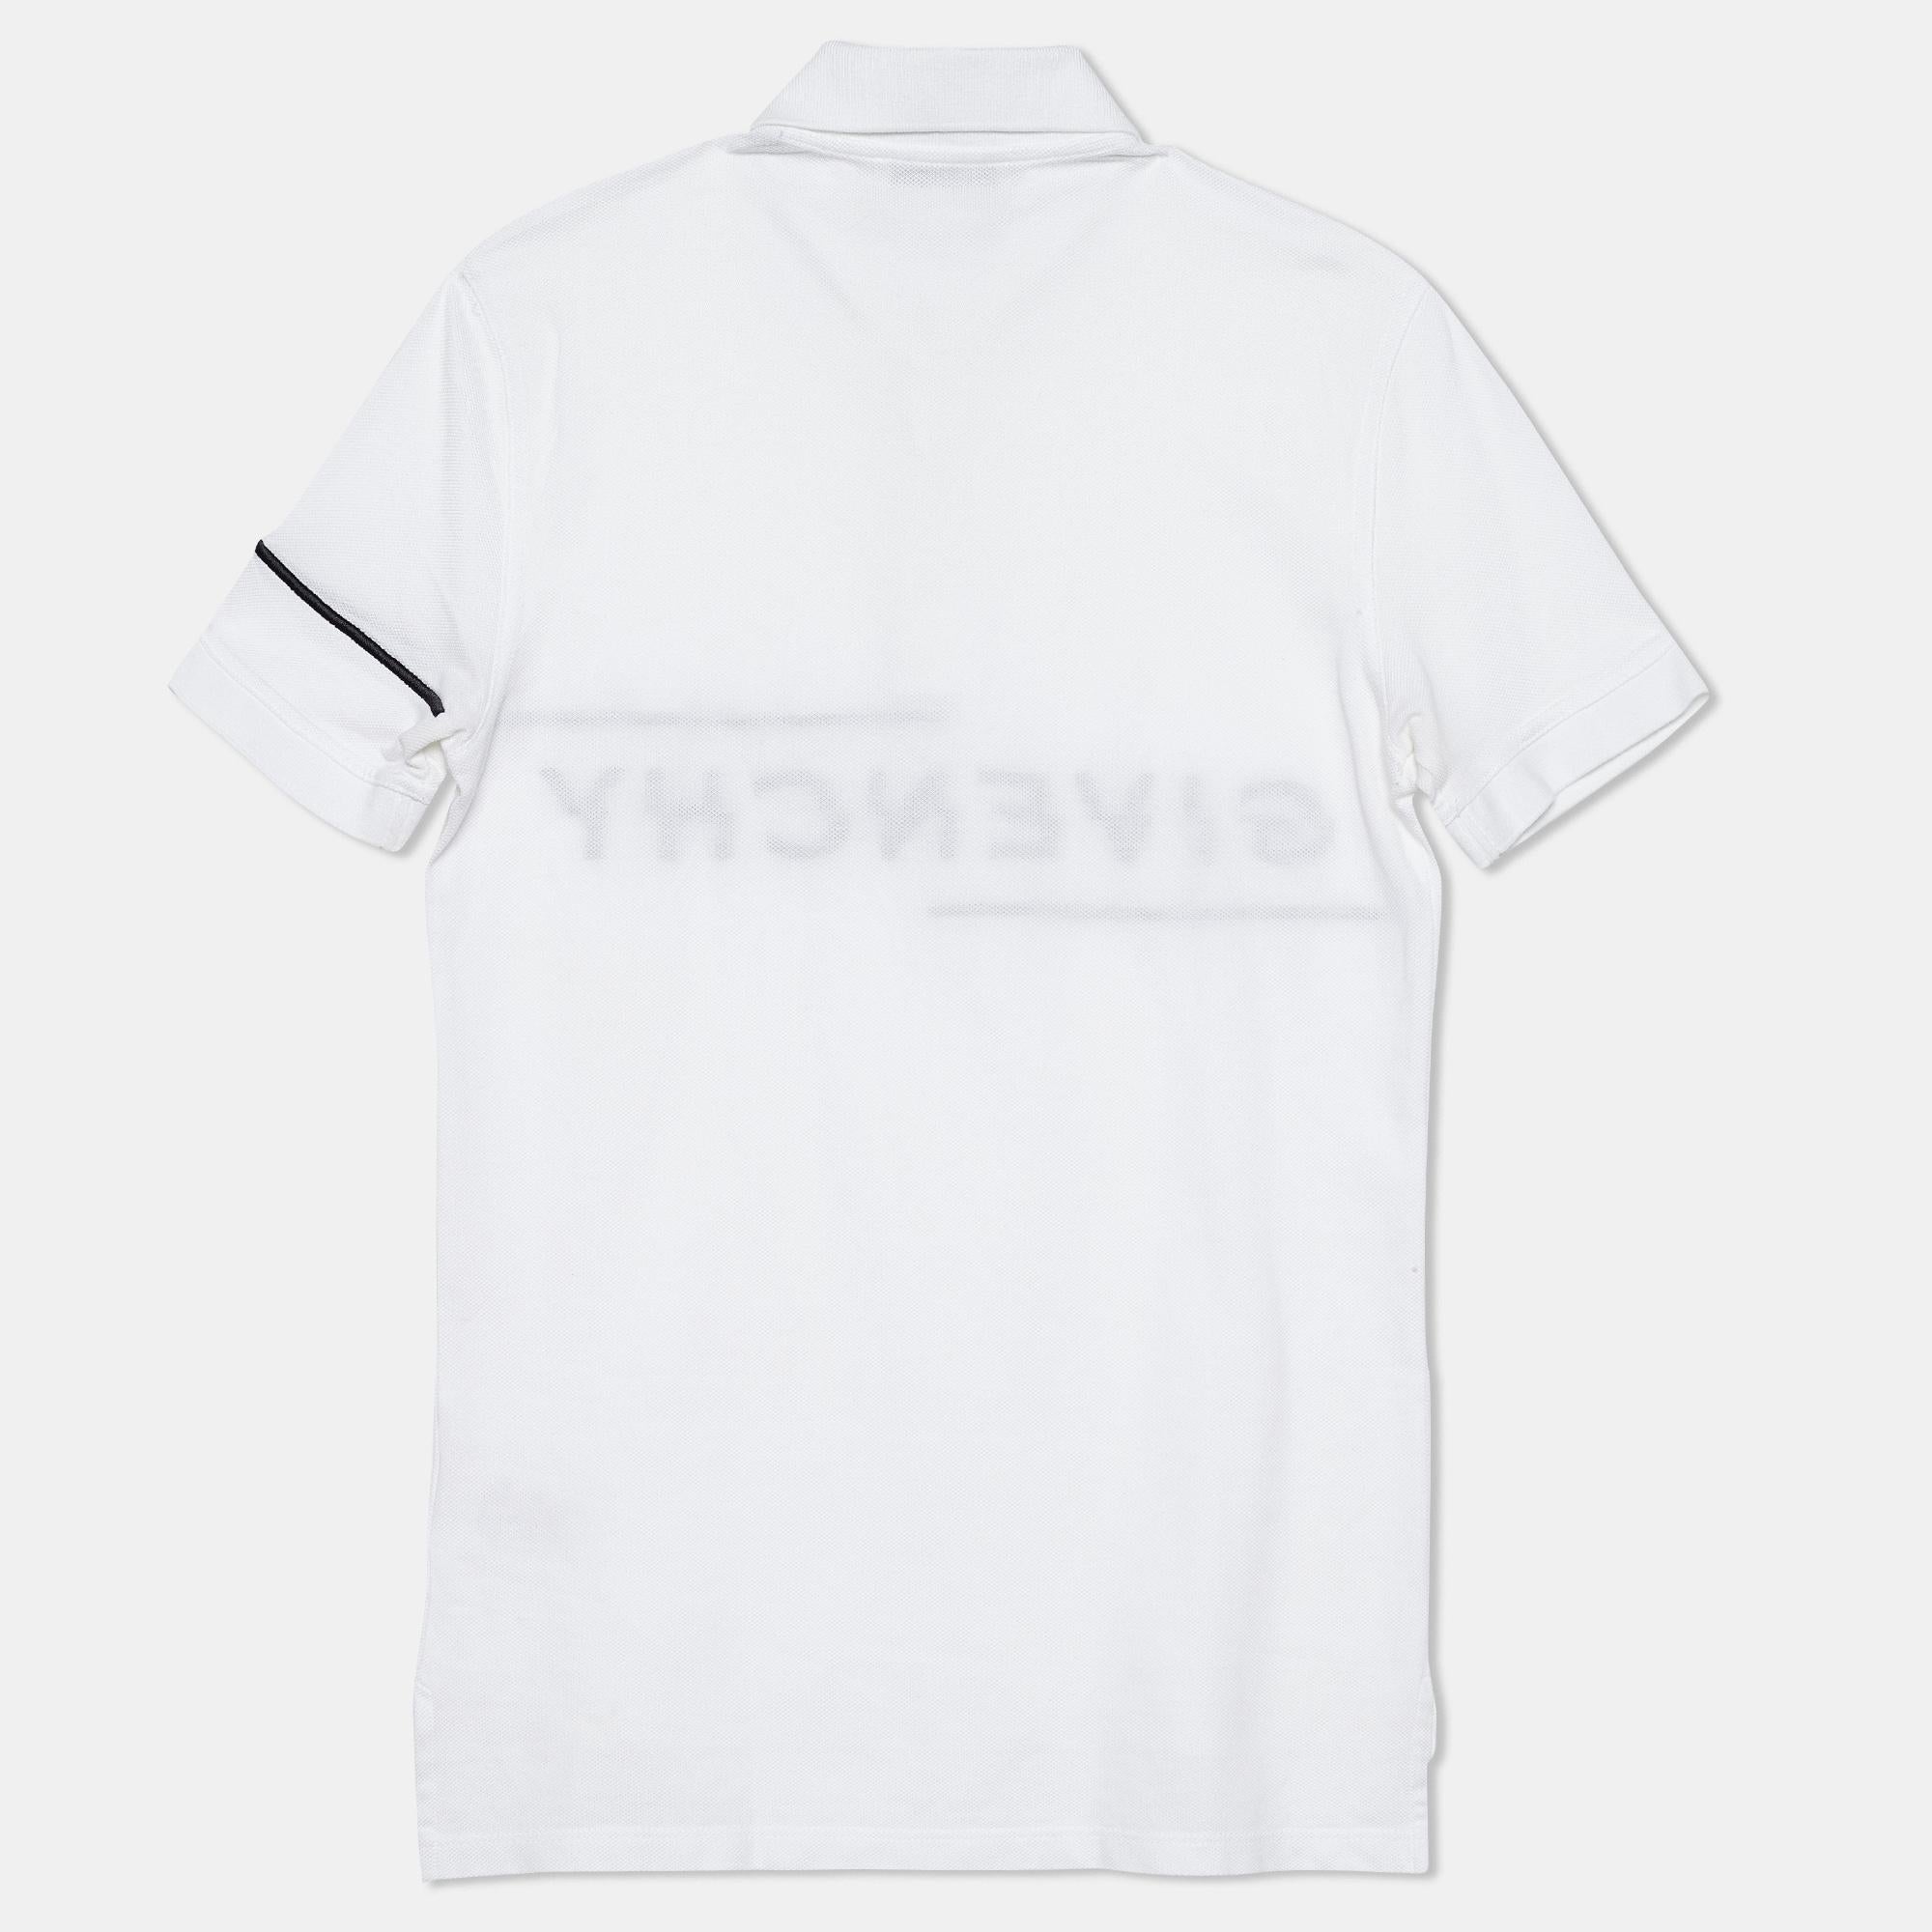 Givenchy's polo t-shirts have always been a classic pick for men. This iteration is tailored using cotton in a classic white hue and finished off with the iconic logo and a buttoned placket. Complete your casual look with a pair of shorts and